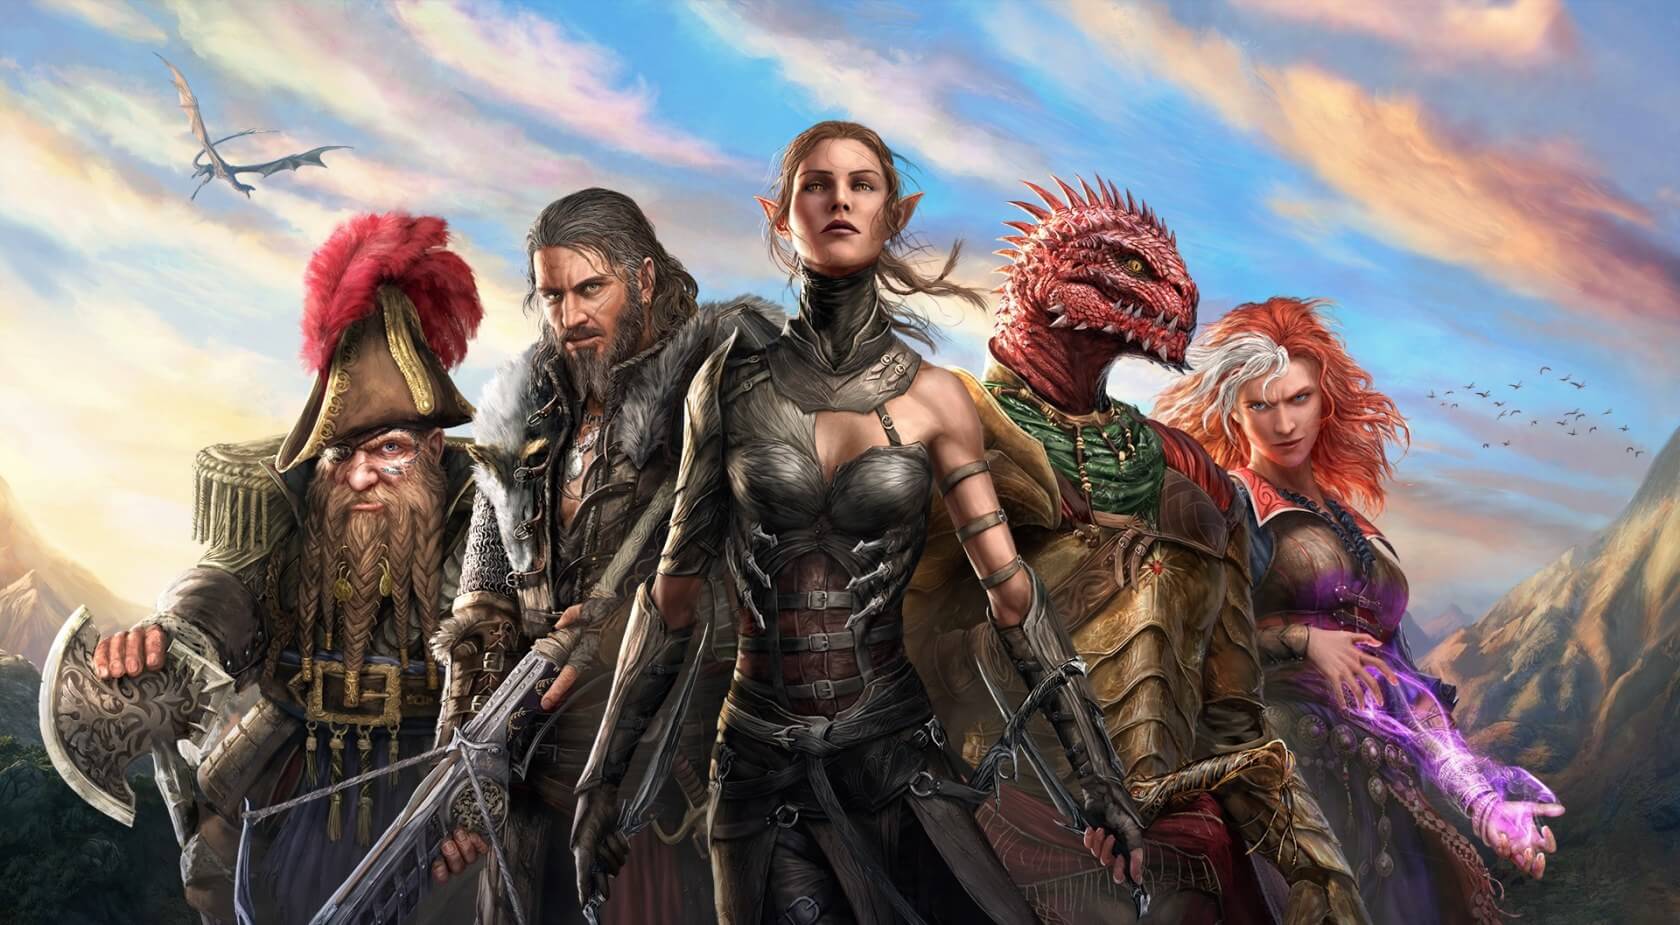 Divinity: Original Sin 2 Definitive Edition is now available on PC and consoles